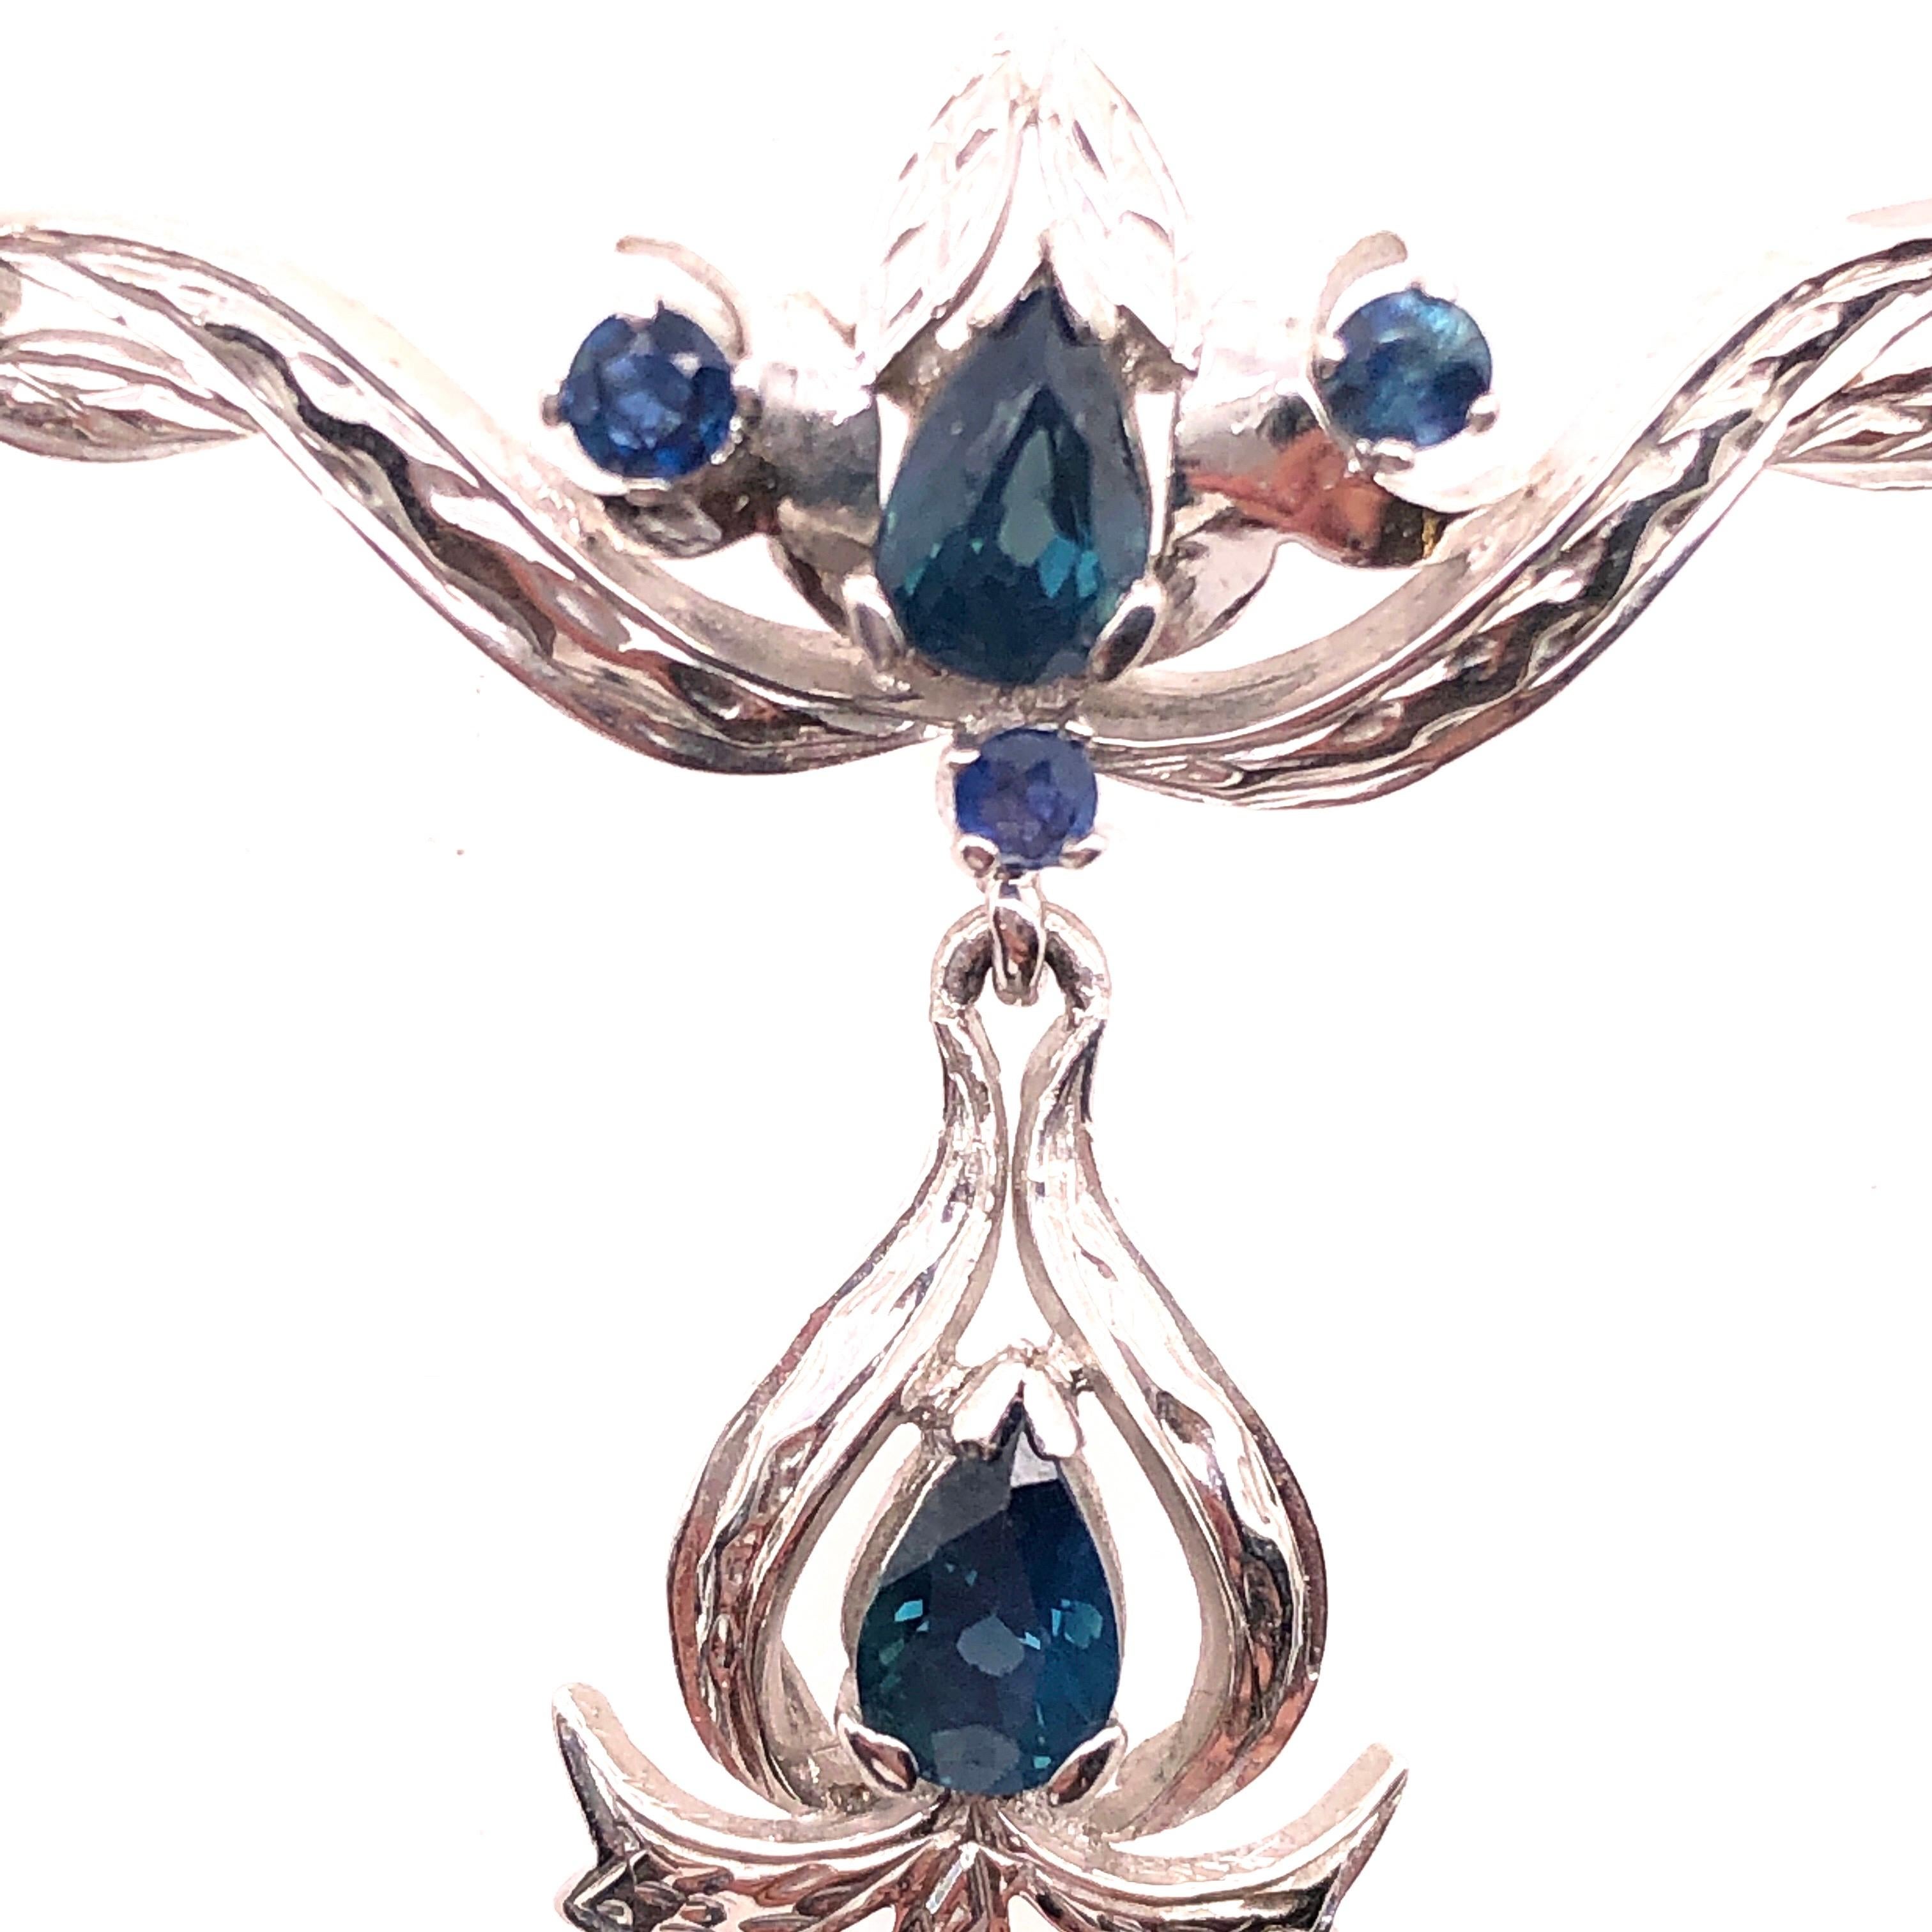 18 Karat White Gold With Blue Sapphire Drop Pendent Necklace.
20 inch Chain
Pendant: 10 cm width
                 3cm height
15.40 grams total weight